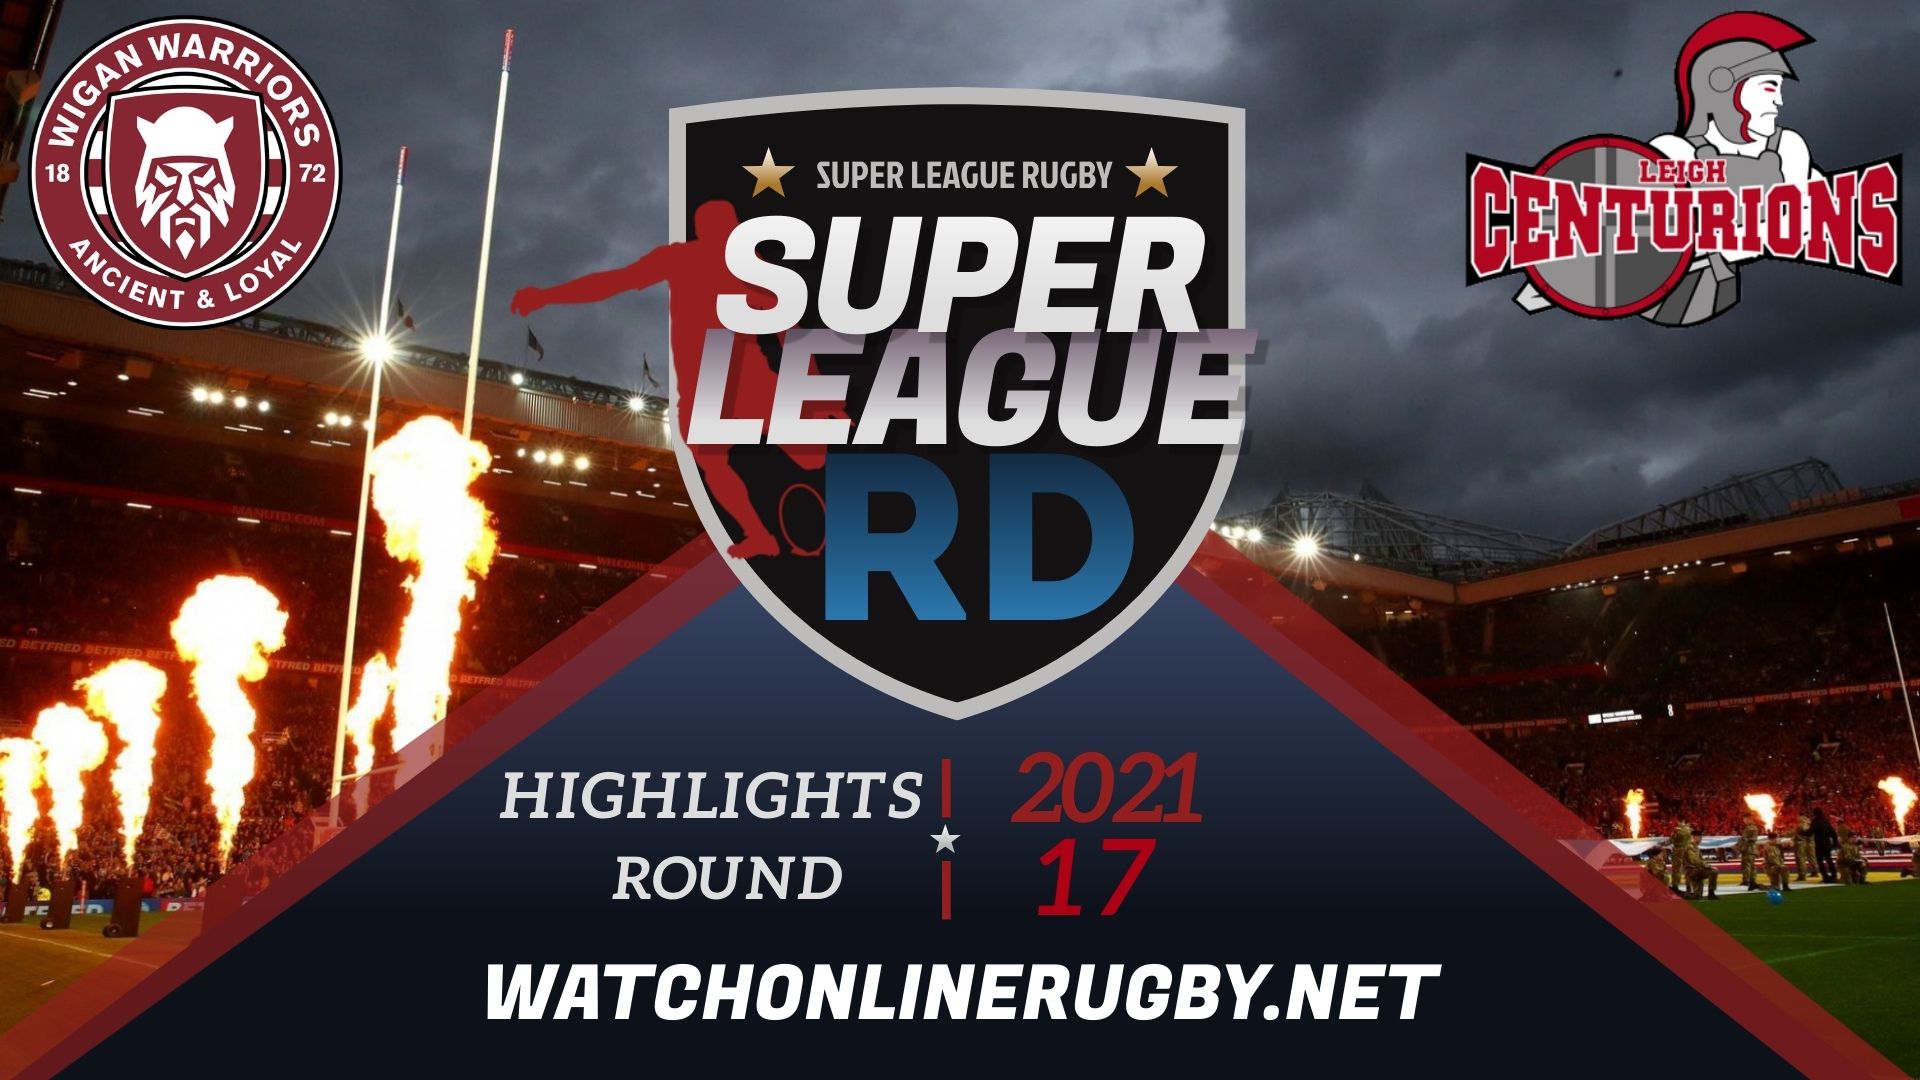 Wigan Warriors Vs Leigh Centurions Super League Rugby 2021 RD 17